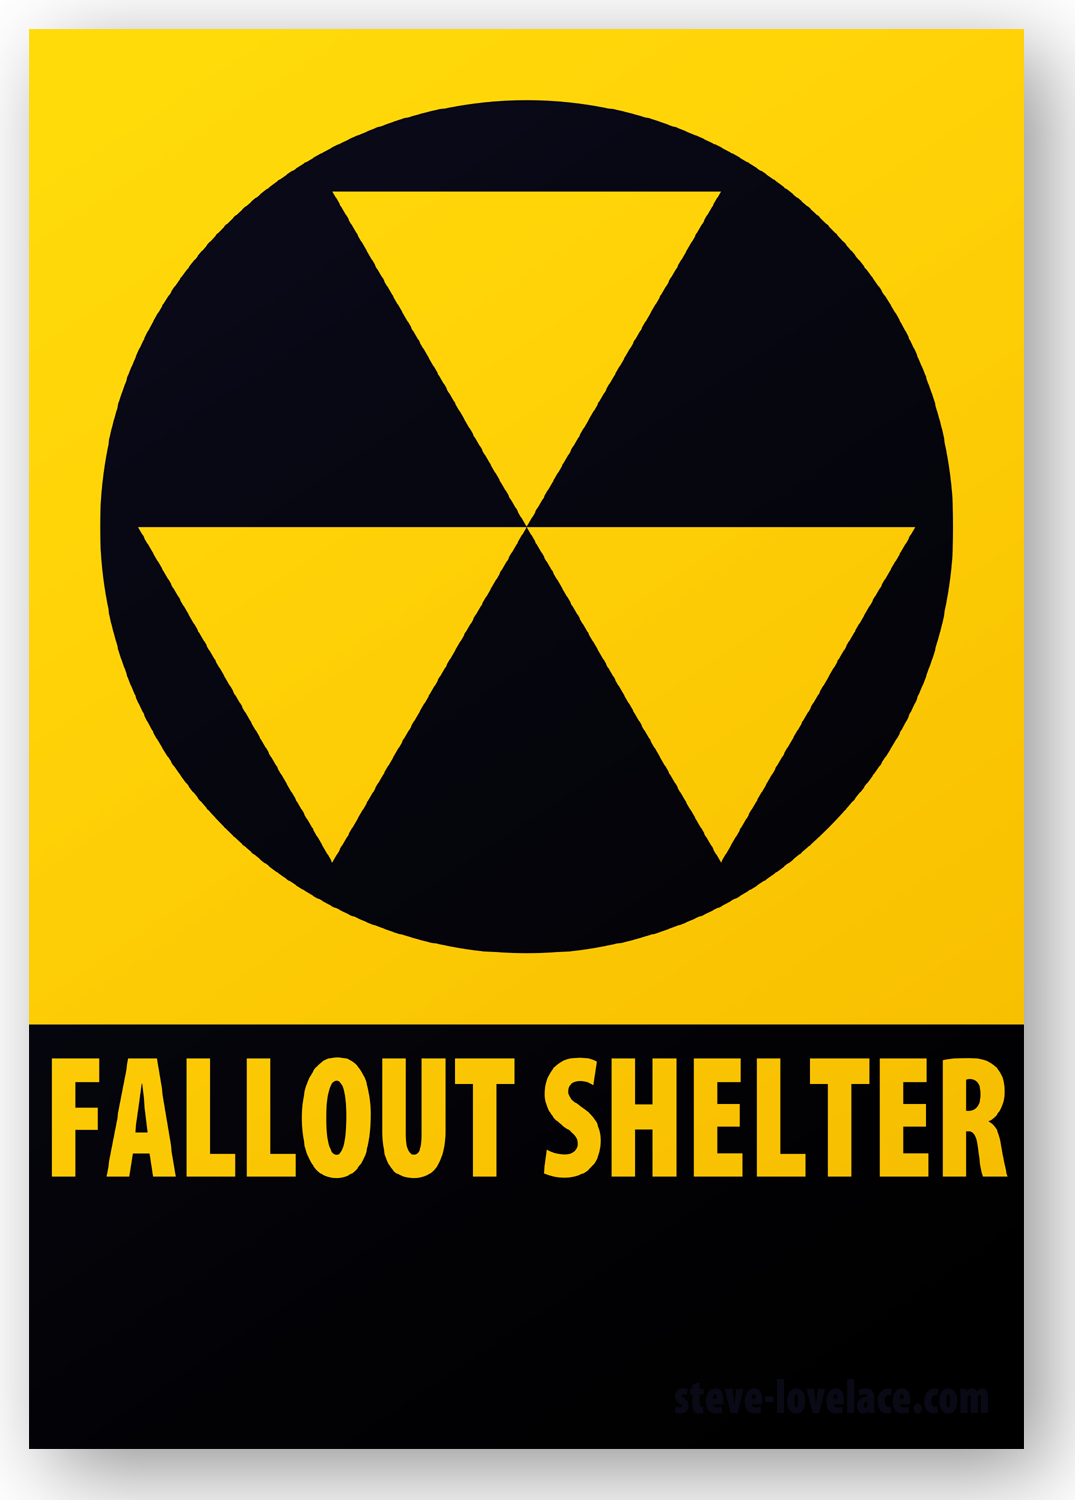 abandoned fallout shelters fall out shelter sign